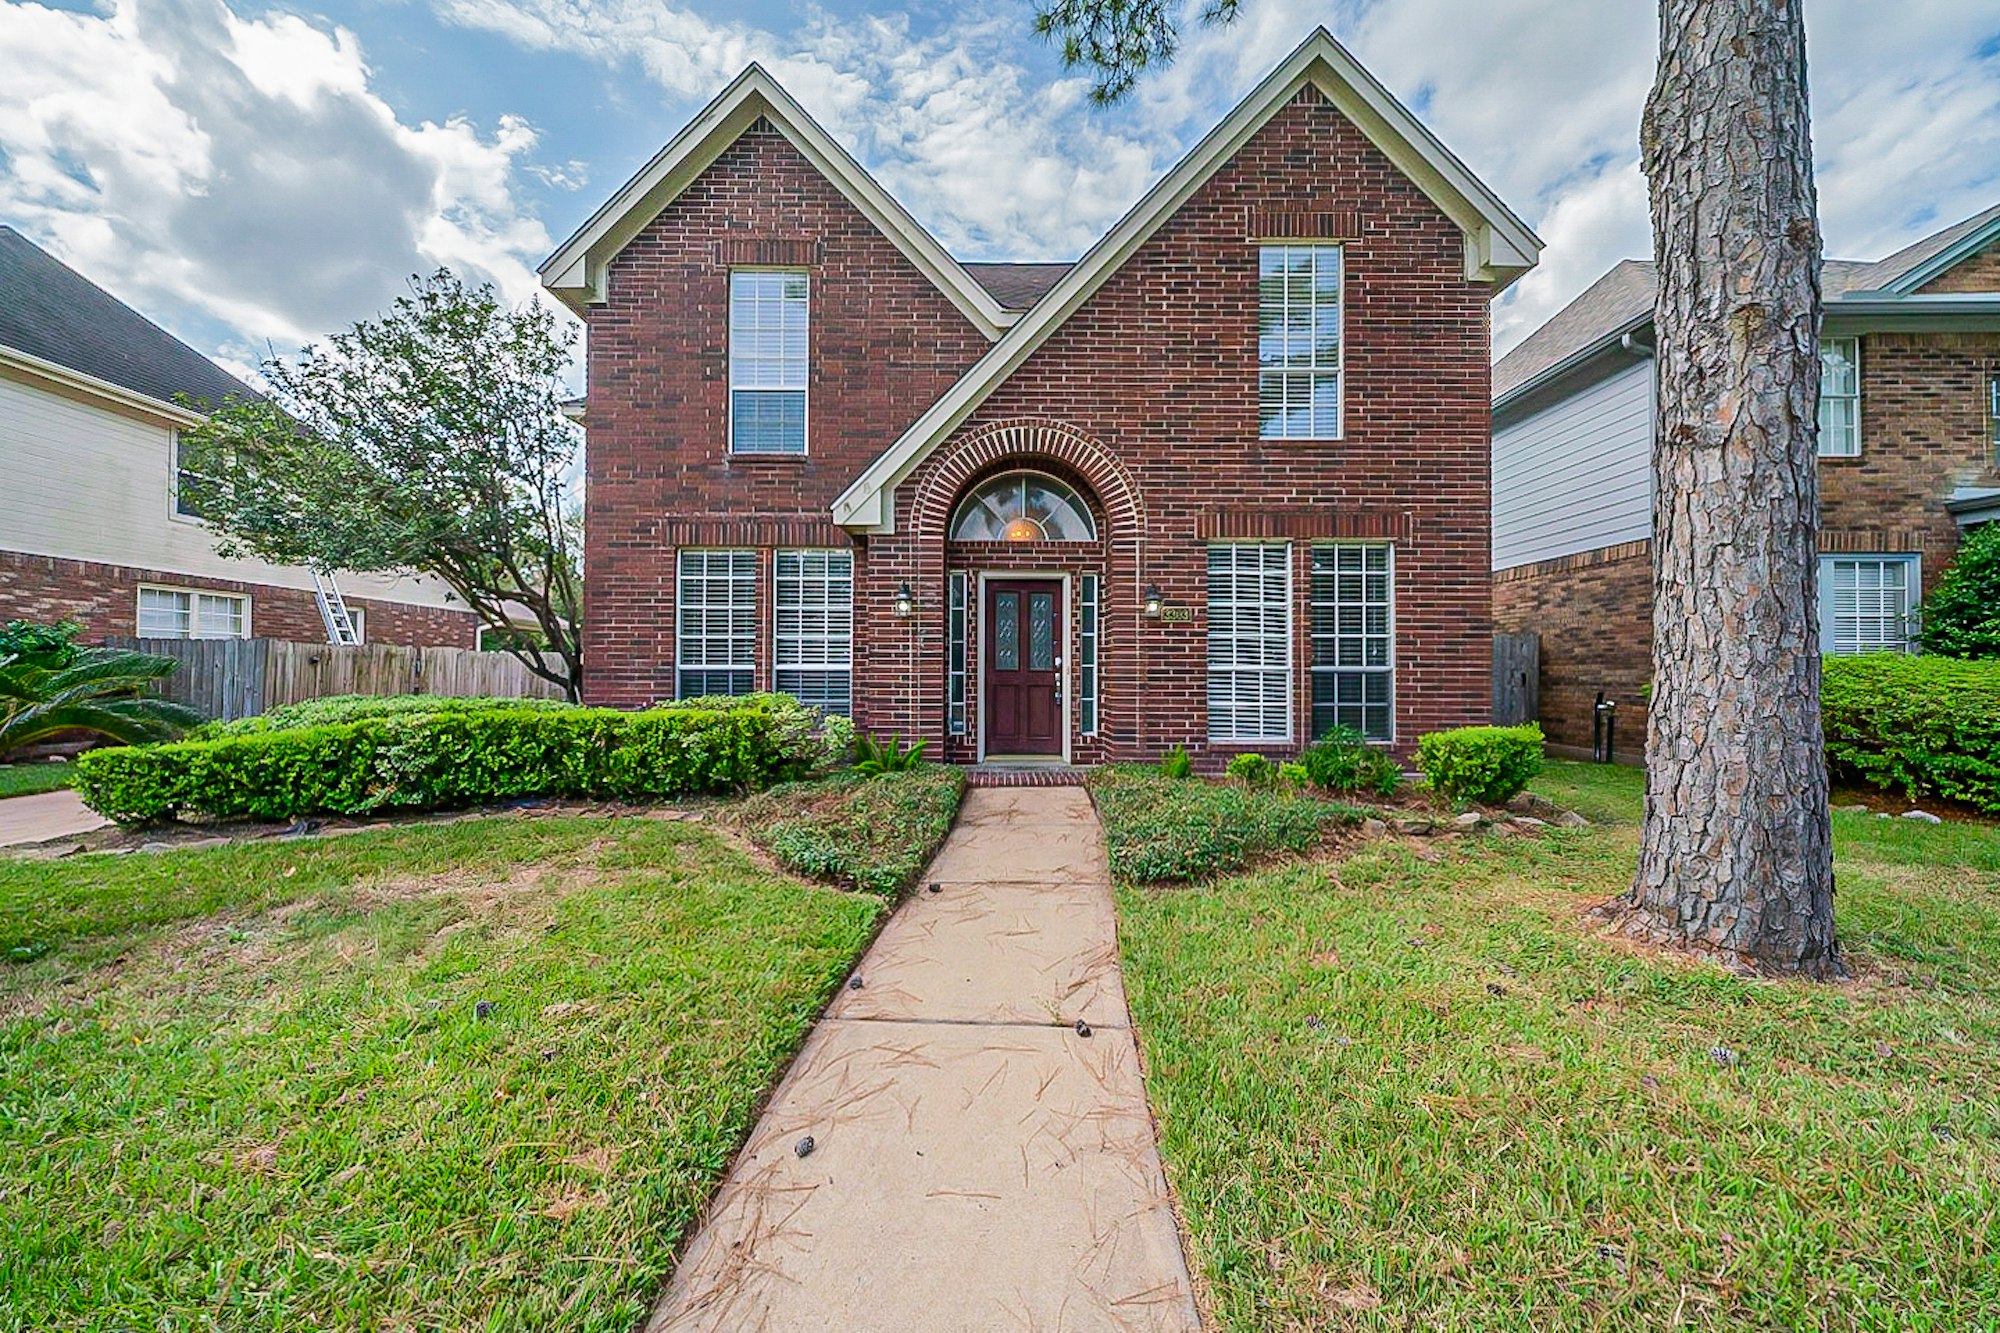 Photo 1 of 36 - 3303 Mulberry Hill Ln, Houston, TX 77084